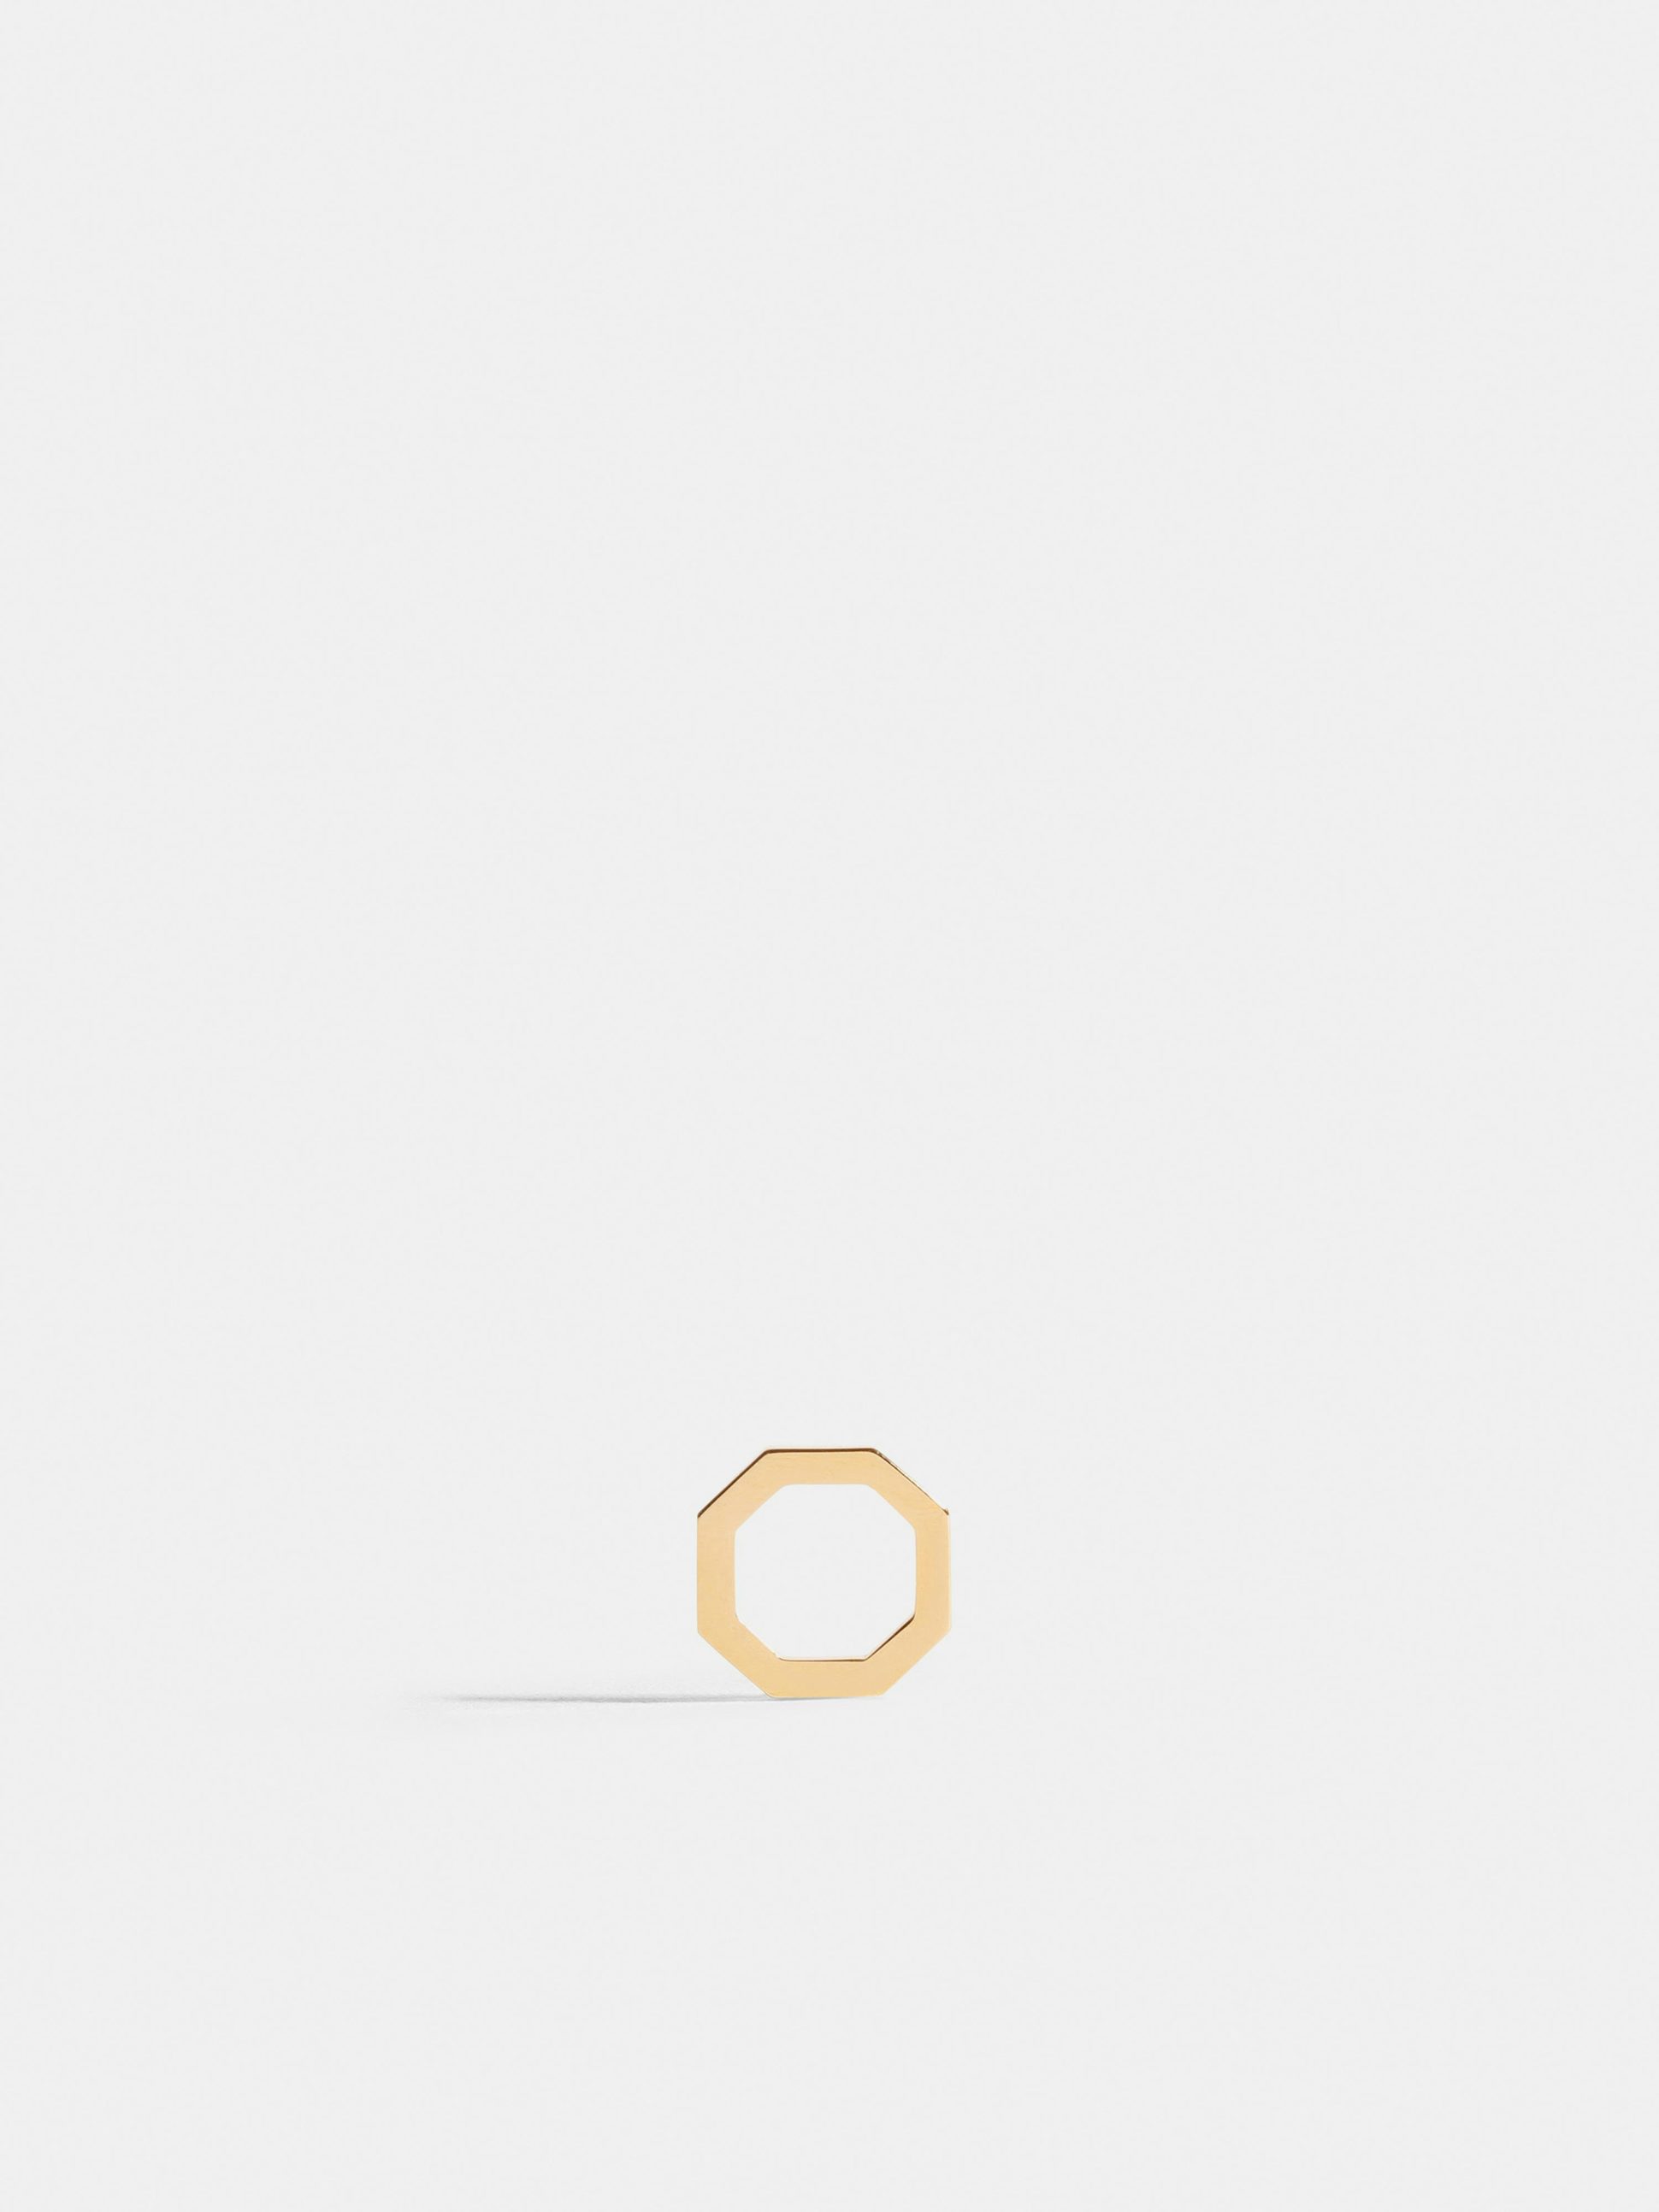 Octogone motif in 18k Fairmined ethical yellow gold, on a honey yellow cord.